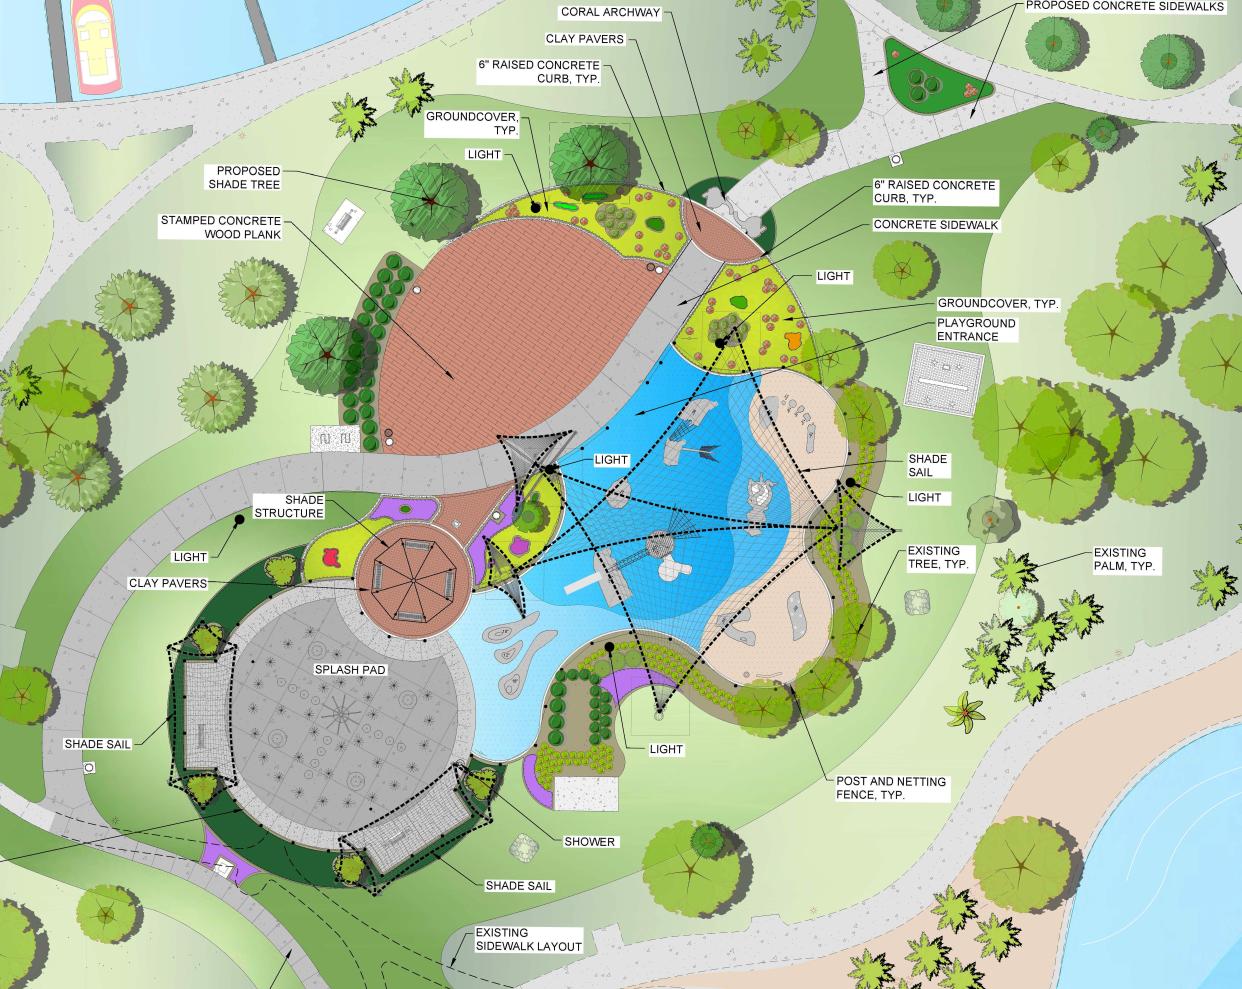 The new playground and splash pad under construction at Bayfront Park will include a one-of-a-kind pirate shipwreck theme.  The project is expected to be completed in October.